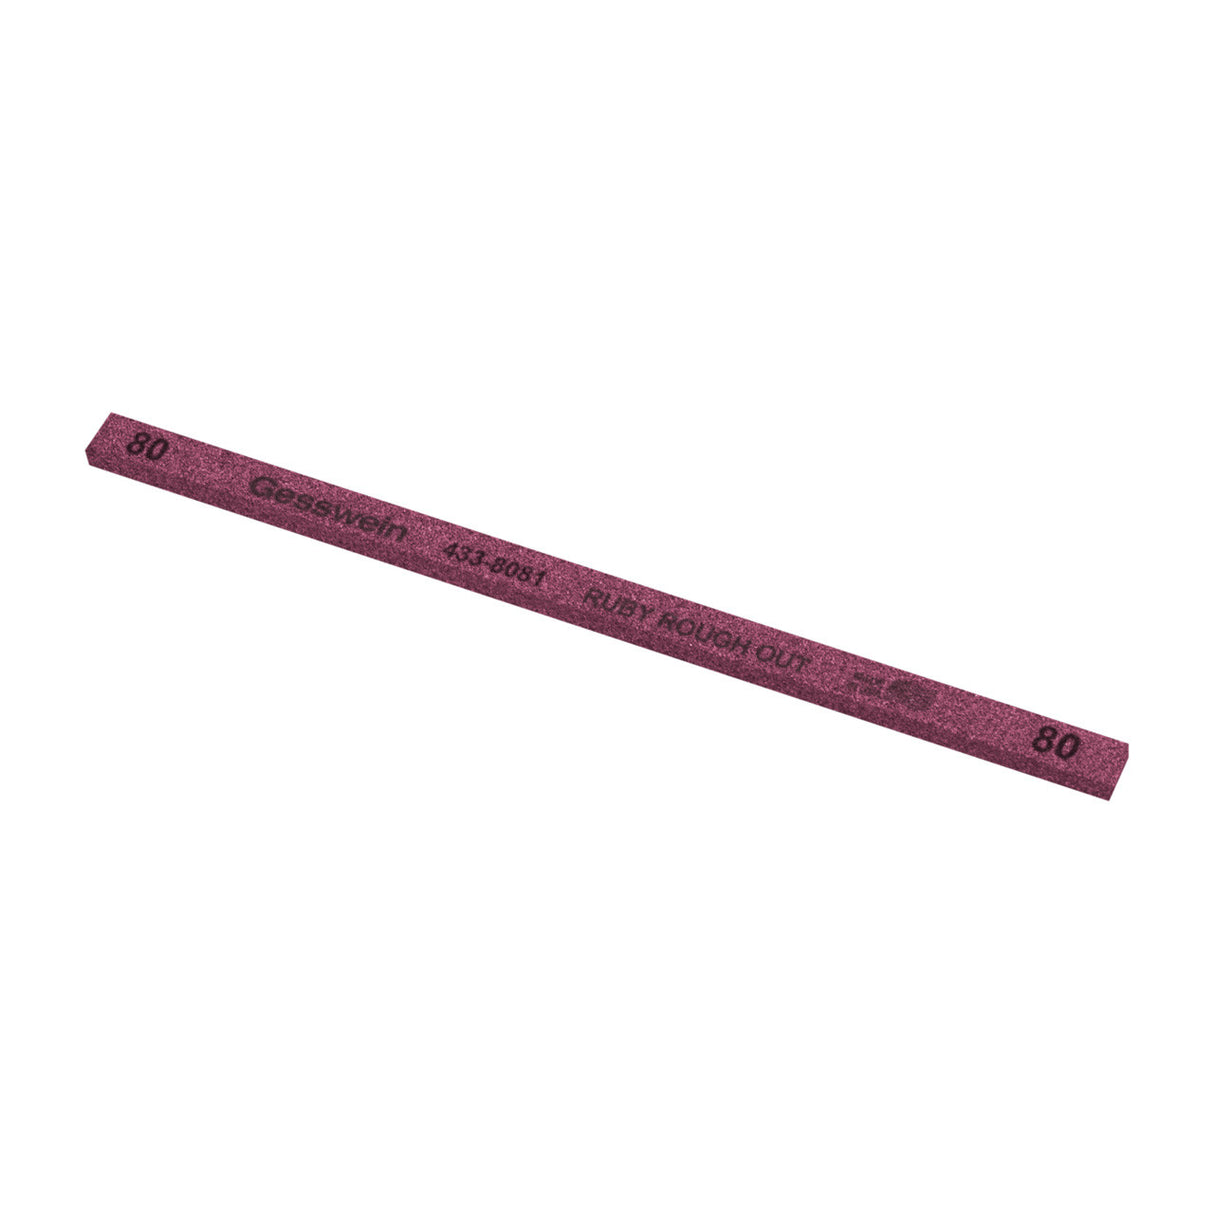 Gesswein® Ruby Rough-Out Stones